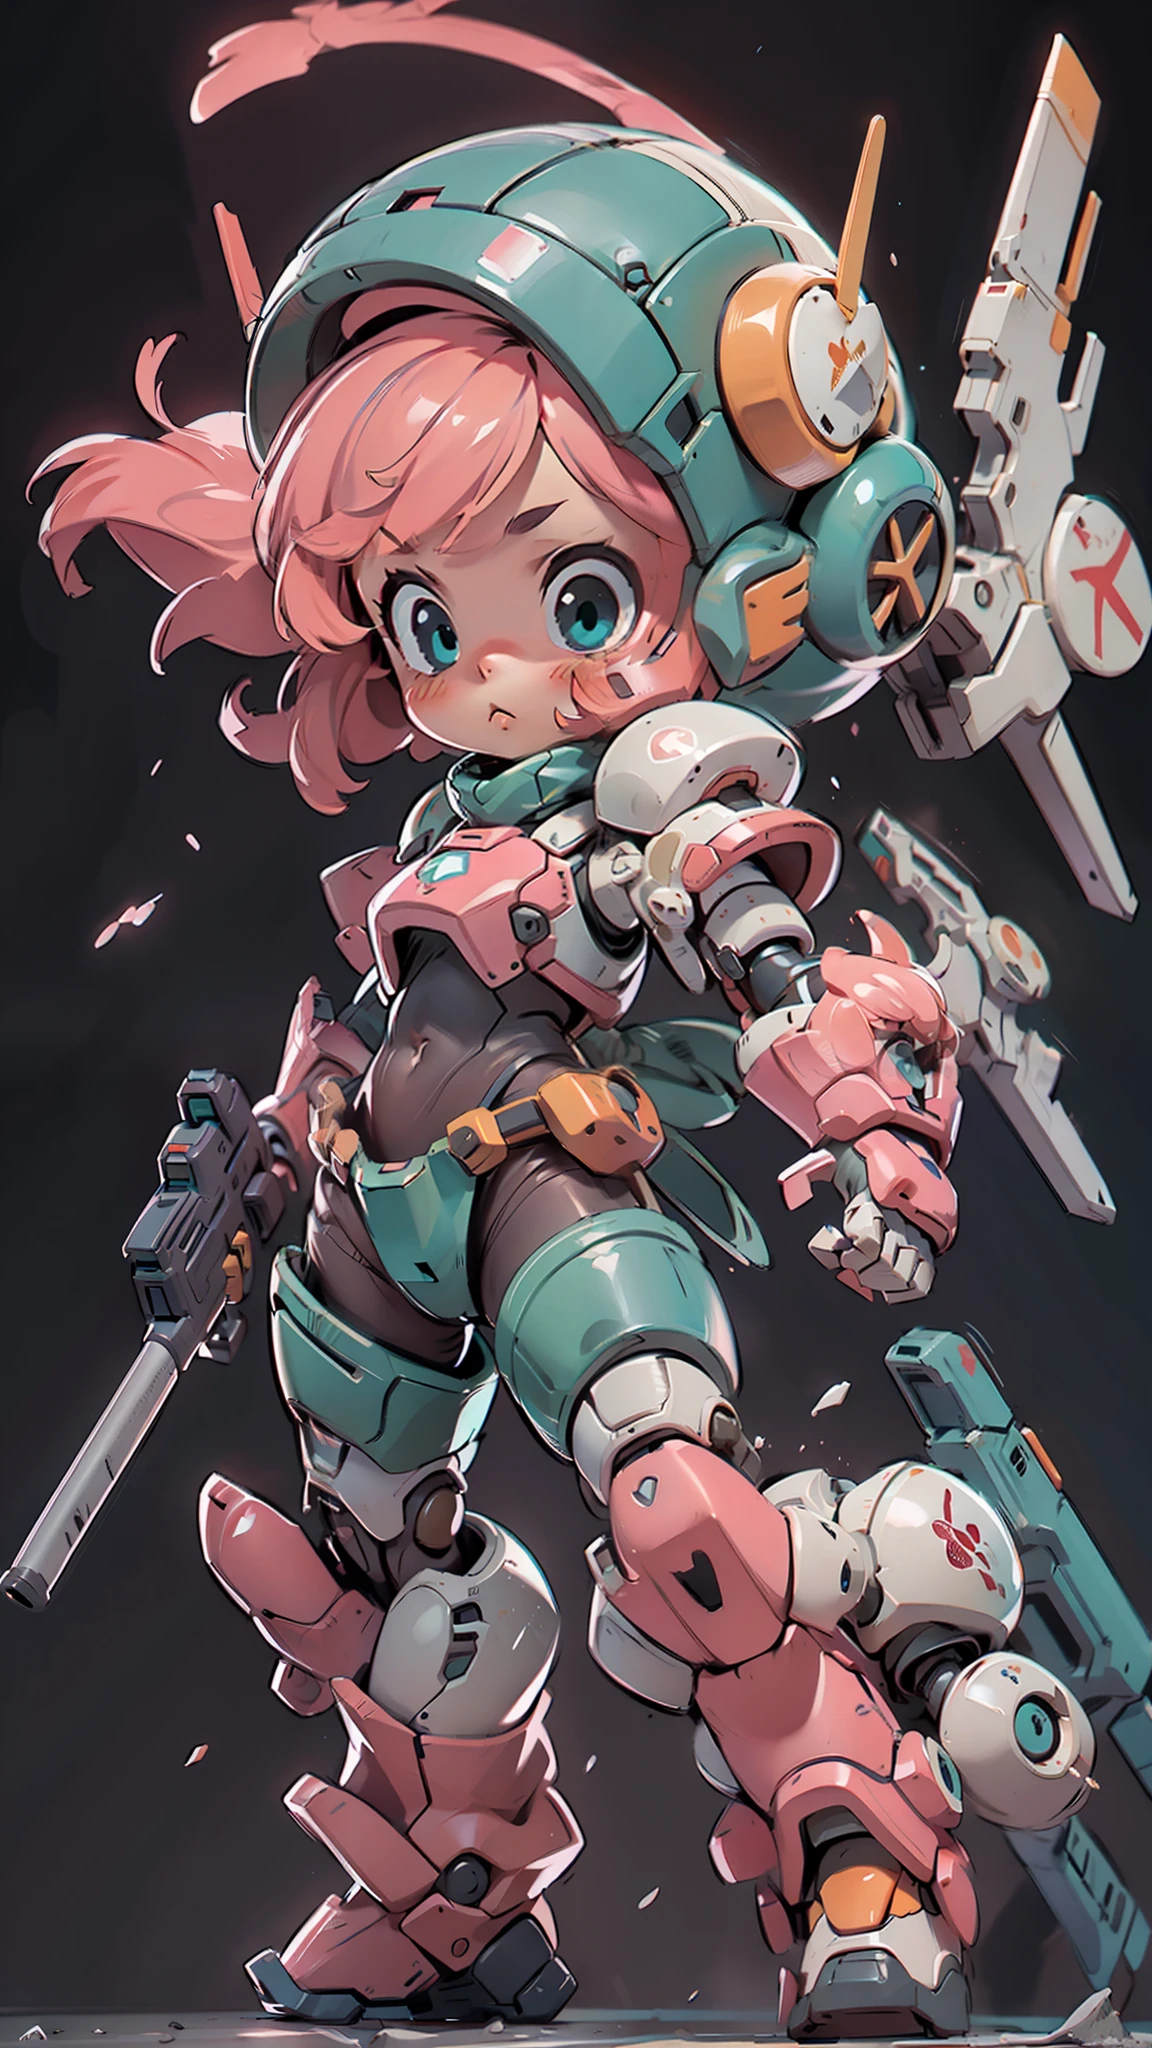 BJ_Cute_Mech,1girl,solo,blush,blue_eyes,holding,closed_mouth,standing,full_body,weapon,pink_hair,chibi,holding_weapon,armor,aqua_eyes,gun,helmet,black_background,clenched_hand,holding_gun,mecha_musume,power_armor,
cinematic lighting,strong contrast,high level of detail,Best quality,masterpiece,White background,